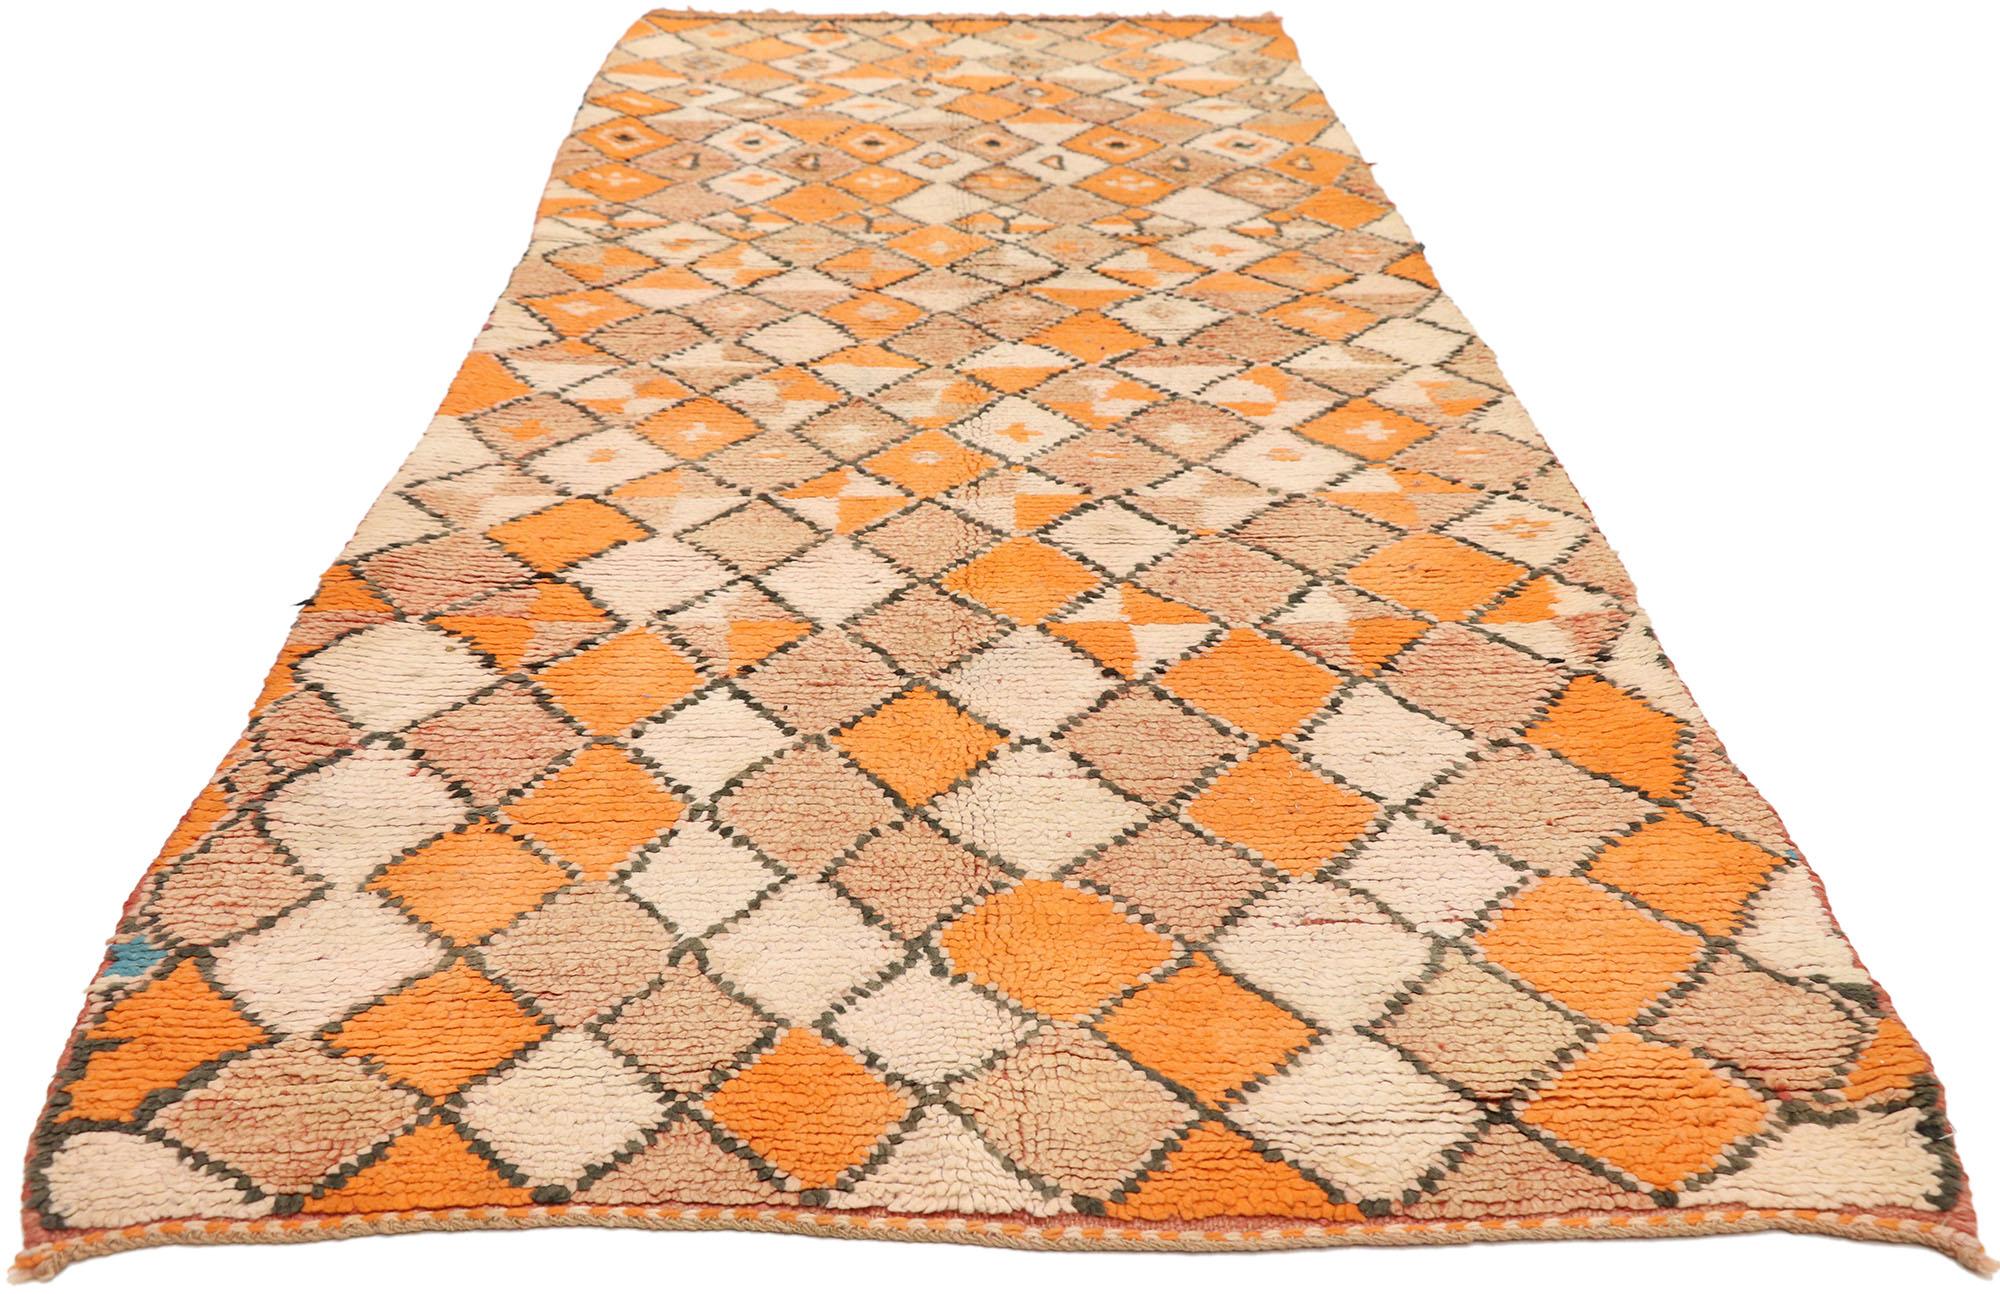 Hand-Knotted Vintage Berber Moroccan Runner with Mid-Century Modern Style, Shag Runner